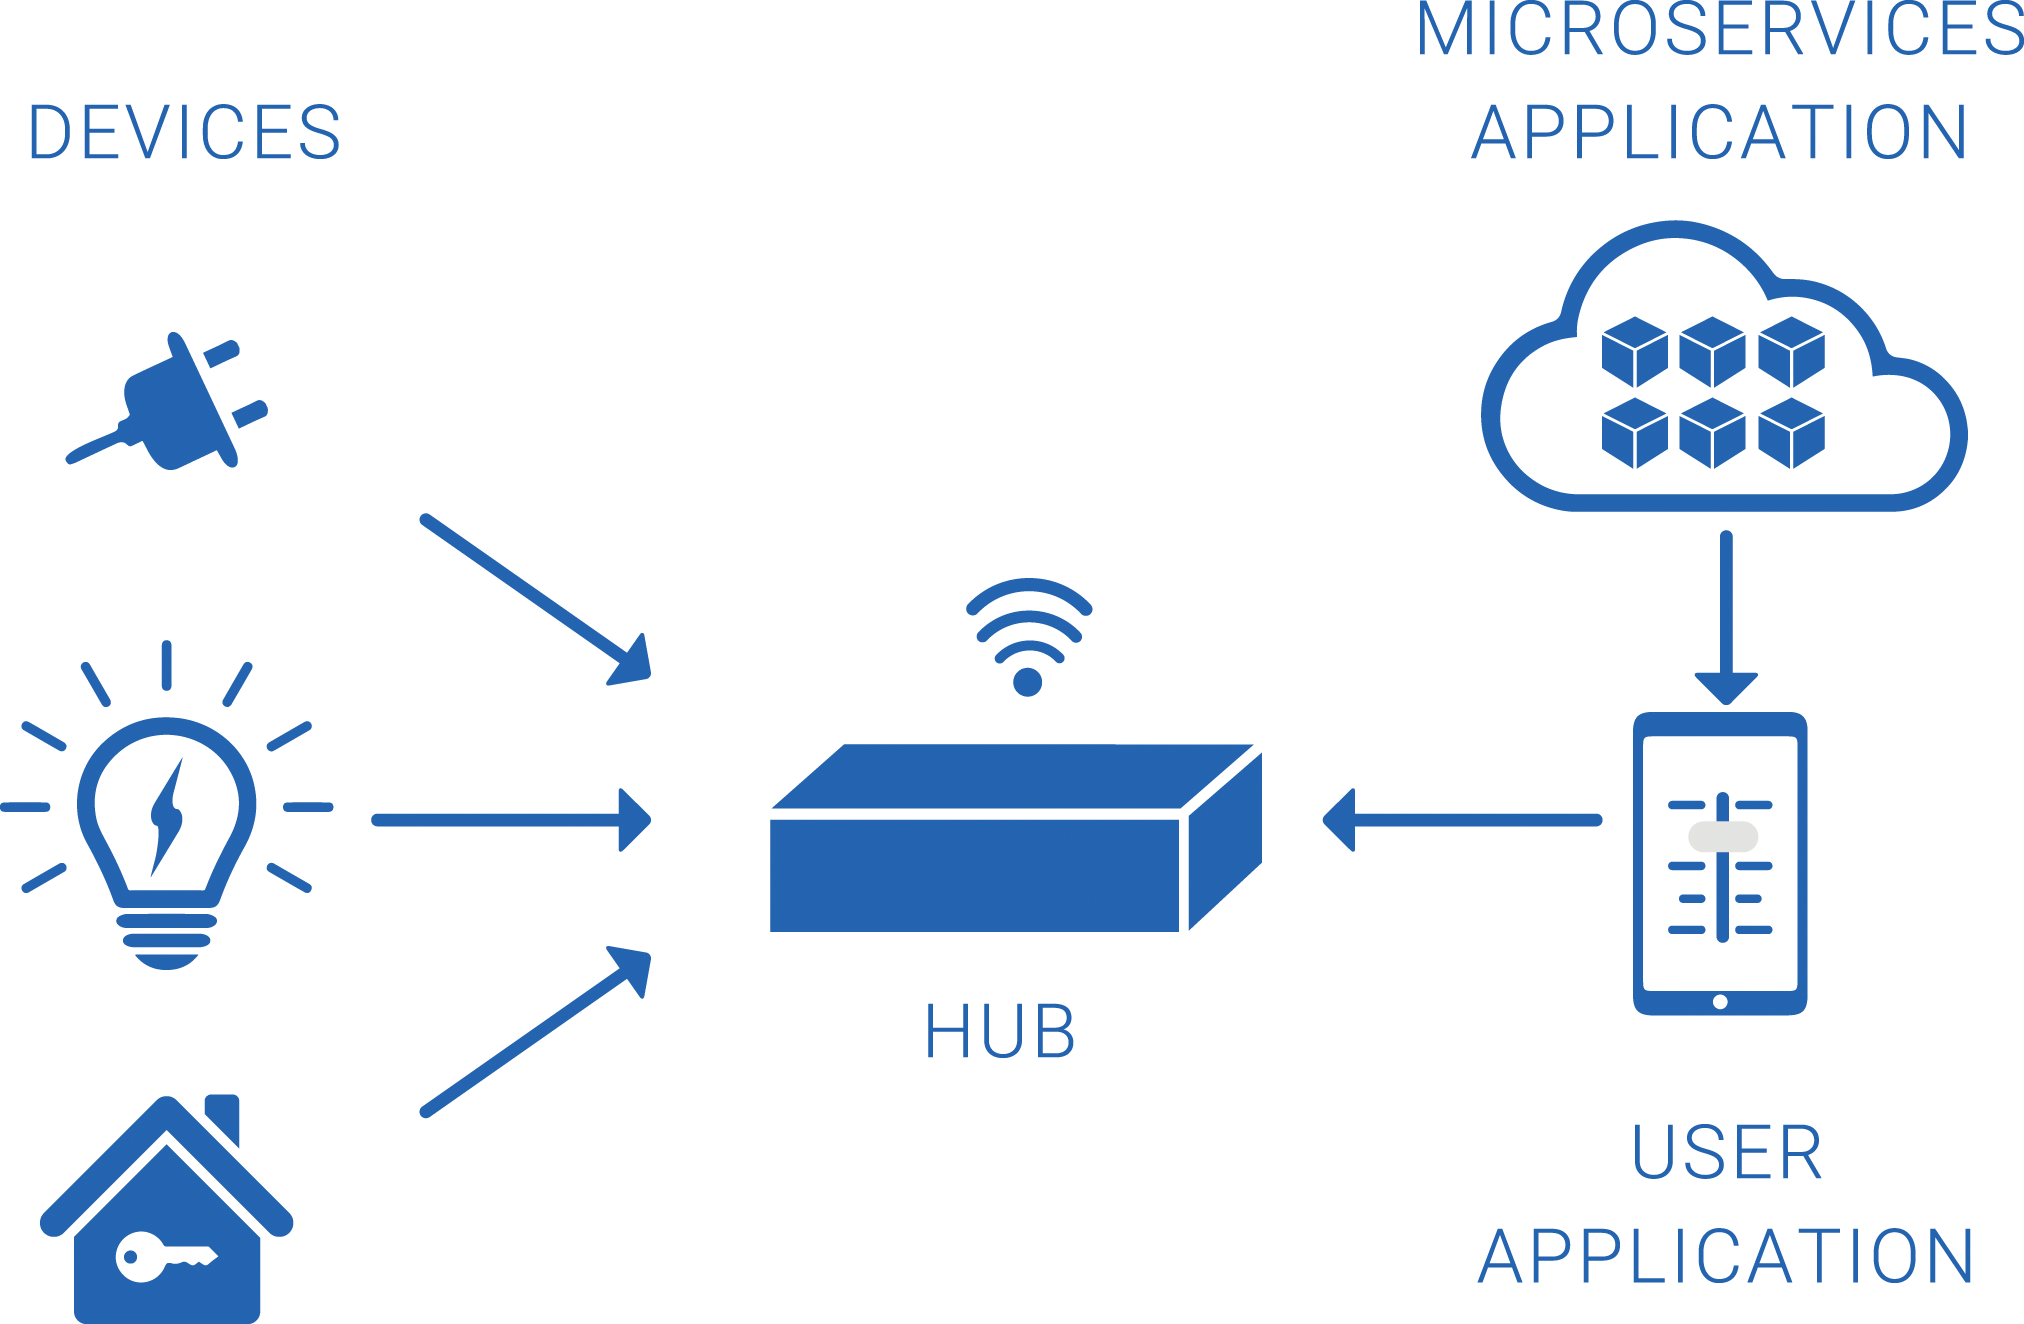 SmartThings Microservices architecture